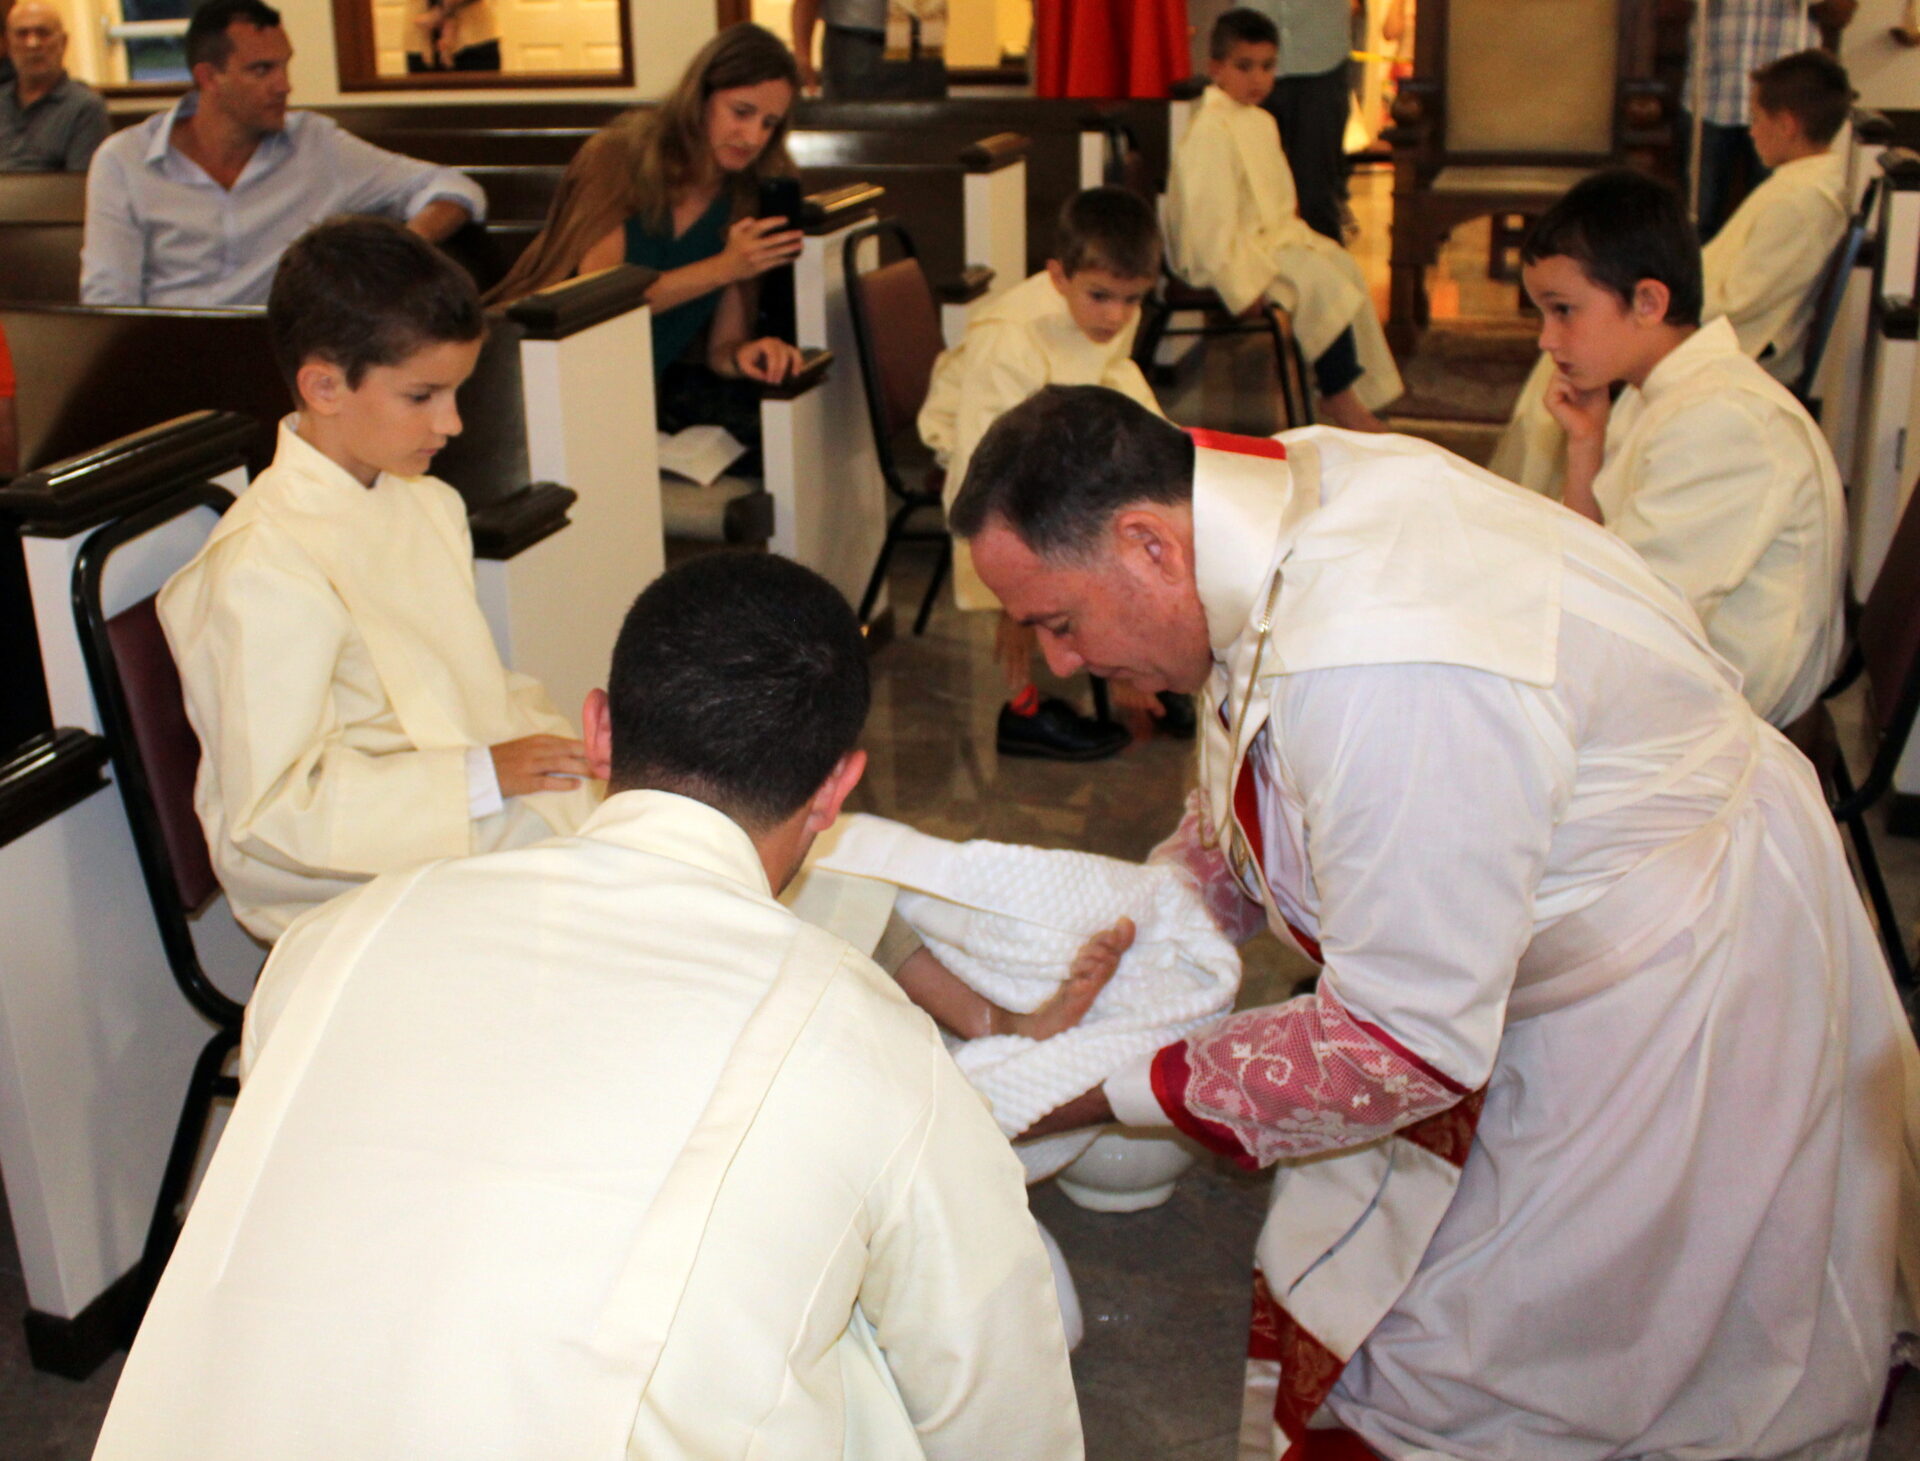 Young sacristans watching the priest washing another young sacristan’s feet